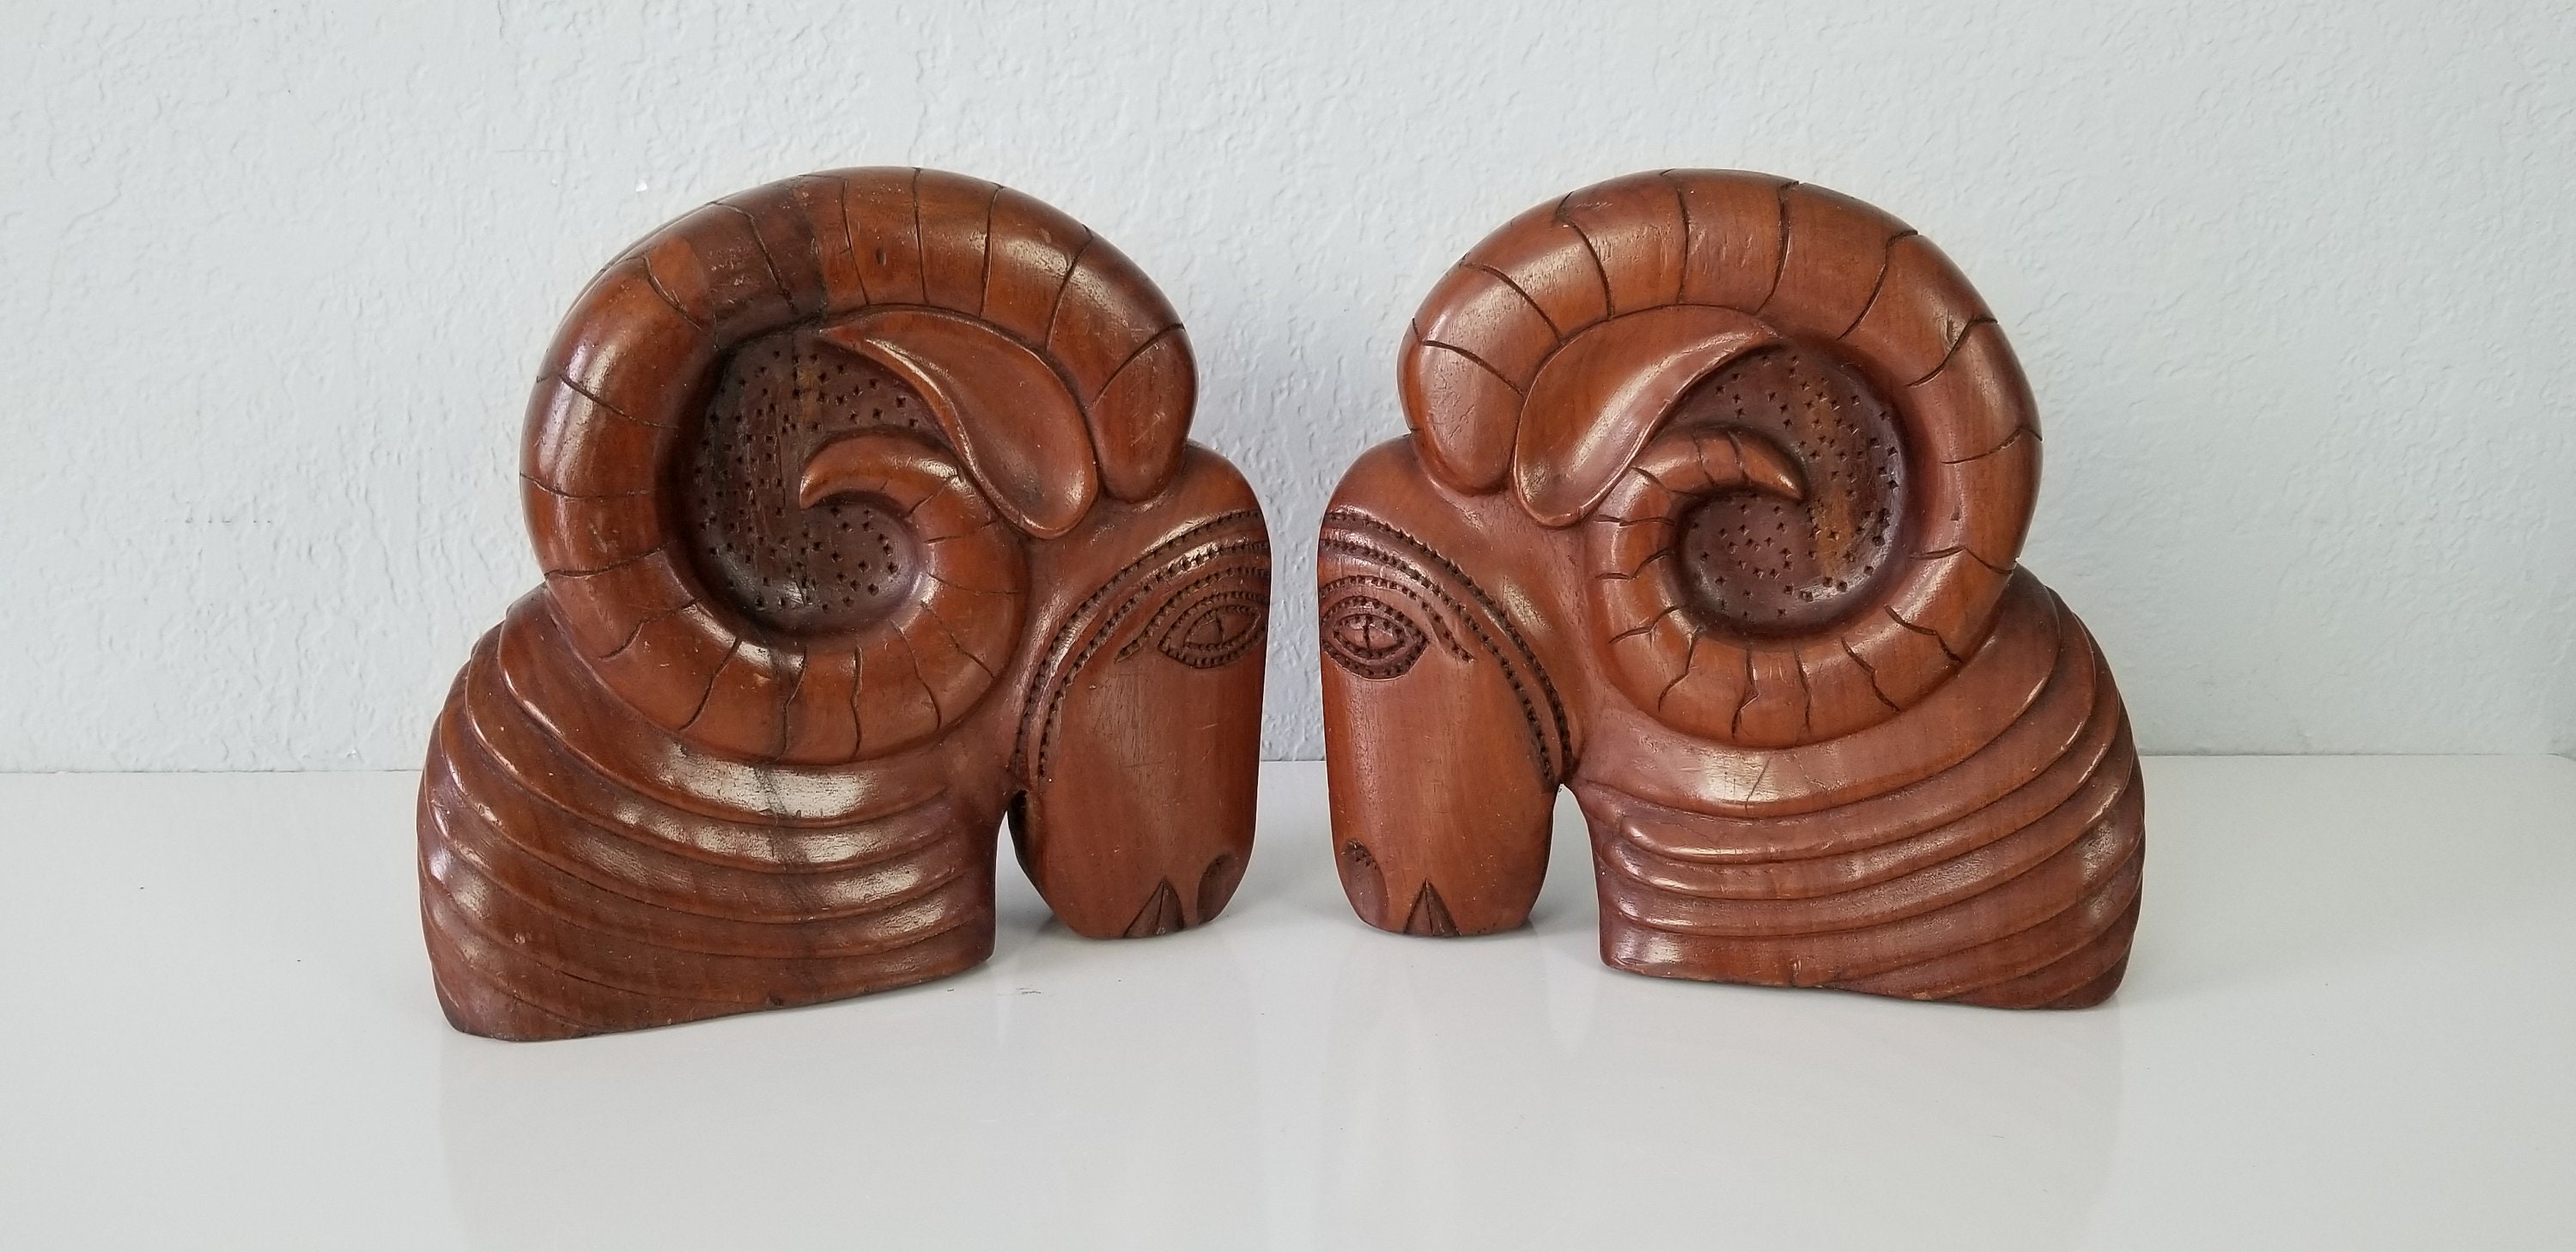 Vintage Hand Carved Wood Rams Head Bookends - A Pair